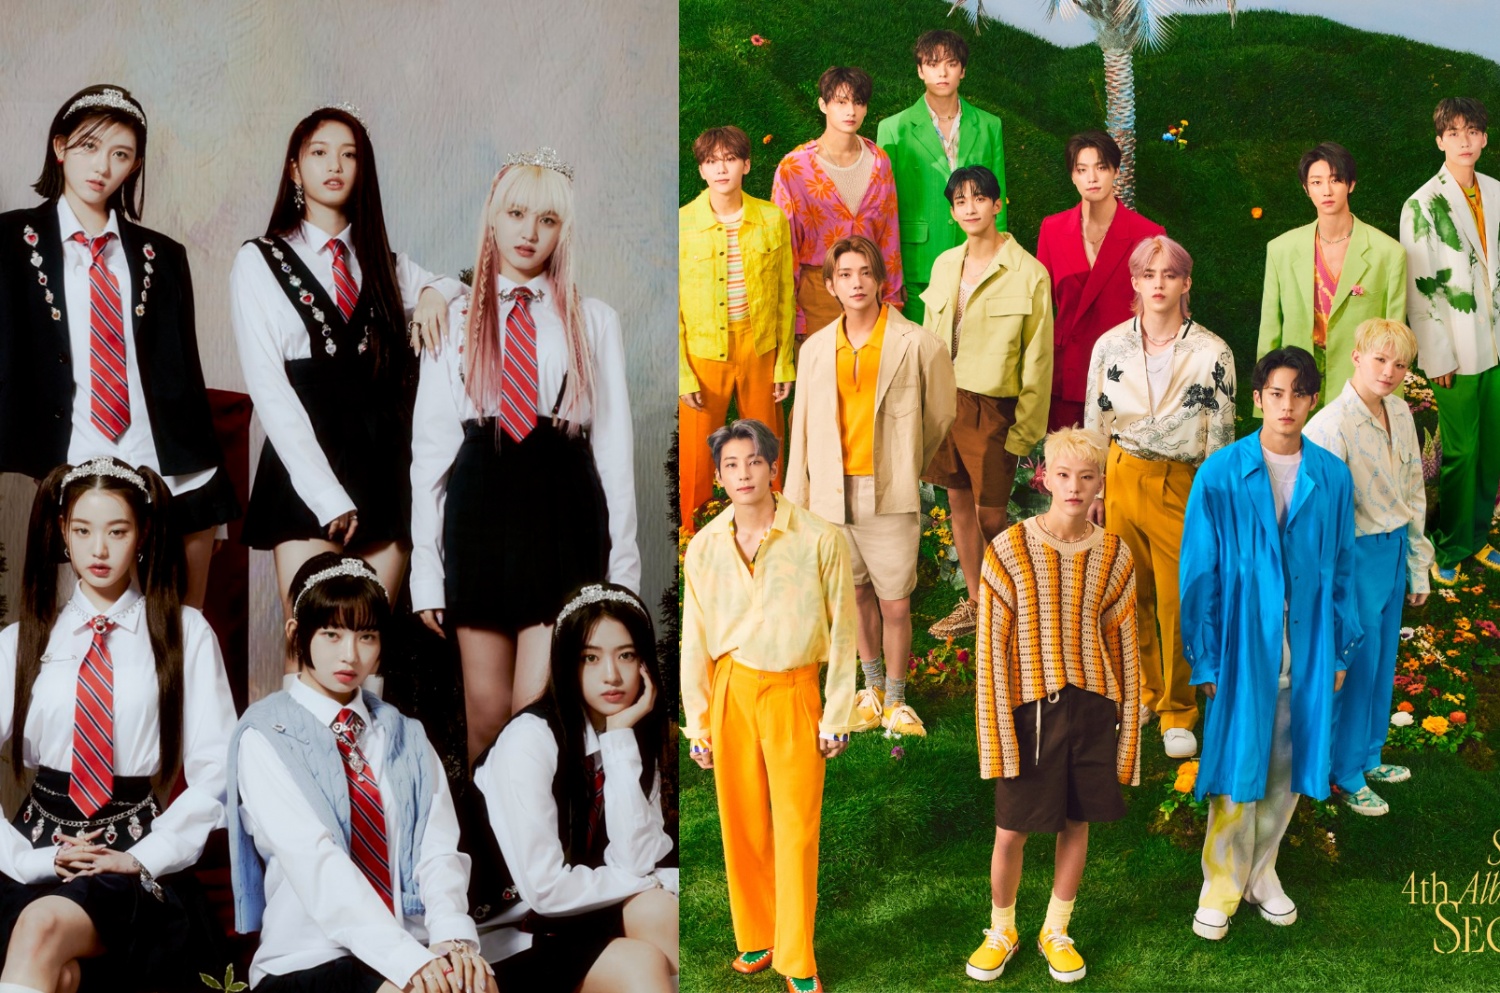 TIME Reveals Top 5 K-Pop Songs and Albums of 2022 – Including Solo and Group Releases